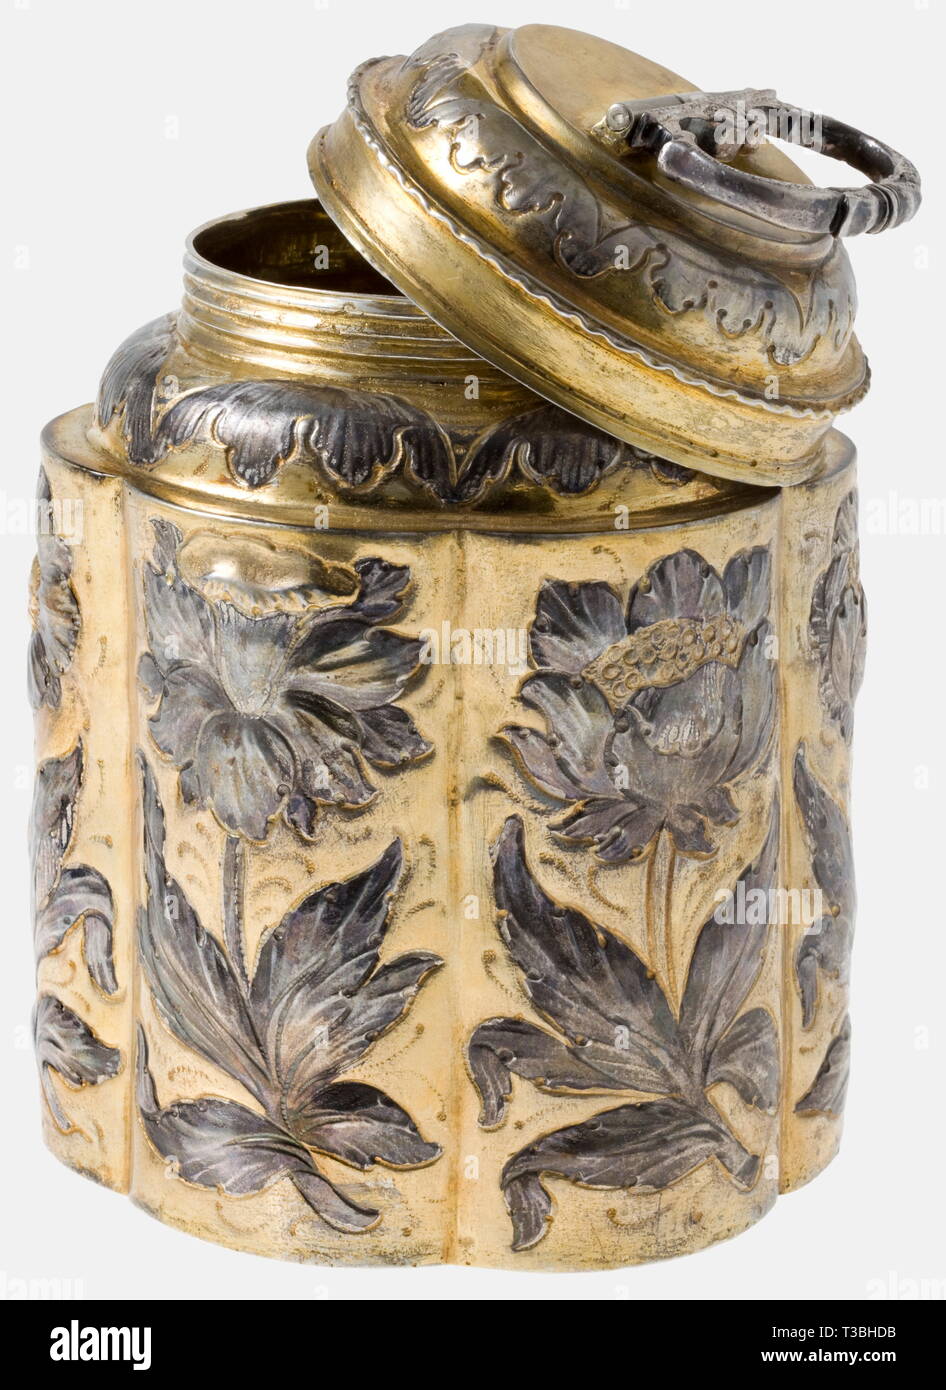 A screw cap bottle, Leipzig, circa 1692 Silver and gilt. Hexafoil body with offset shoulder and a domed screw cap with movable carrying handle. On all sides hammered and chiselled foliage and flower decorations. The bottom punched with 'L' for Leipzig, date letter 'Q' (1692 - 94), as well as '12'. Beside it two erased marks. Lid indistinctly punched. At the bottom and at the transition to the rim two small repairs. Height without handle 13.5 cm, weight 290 g. historic, historical, 17th century, handicrafts, handcraft, craft, object, objects, stil, Additional-Rights-Clearance-Info-Not-Available Stock Photo